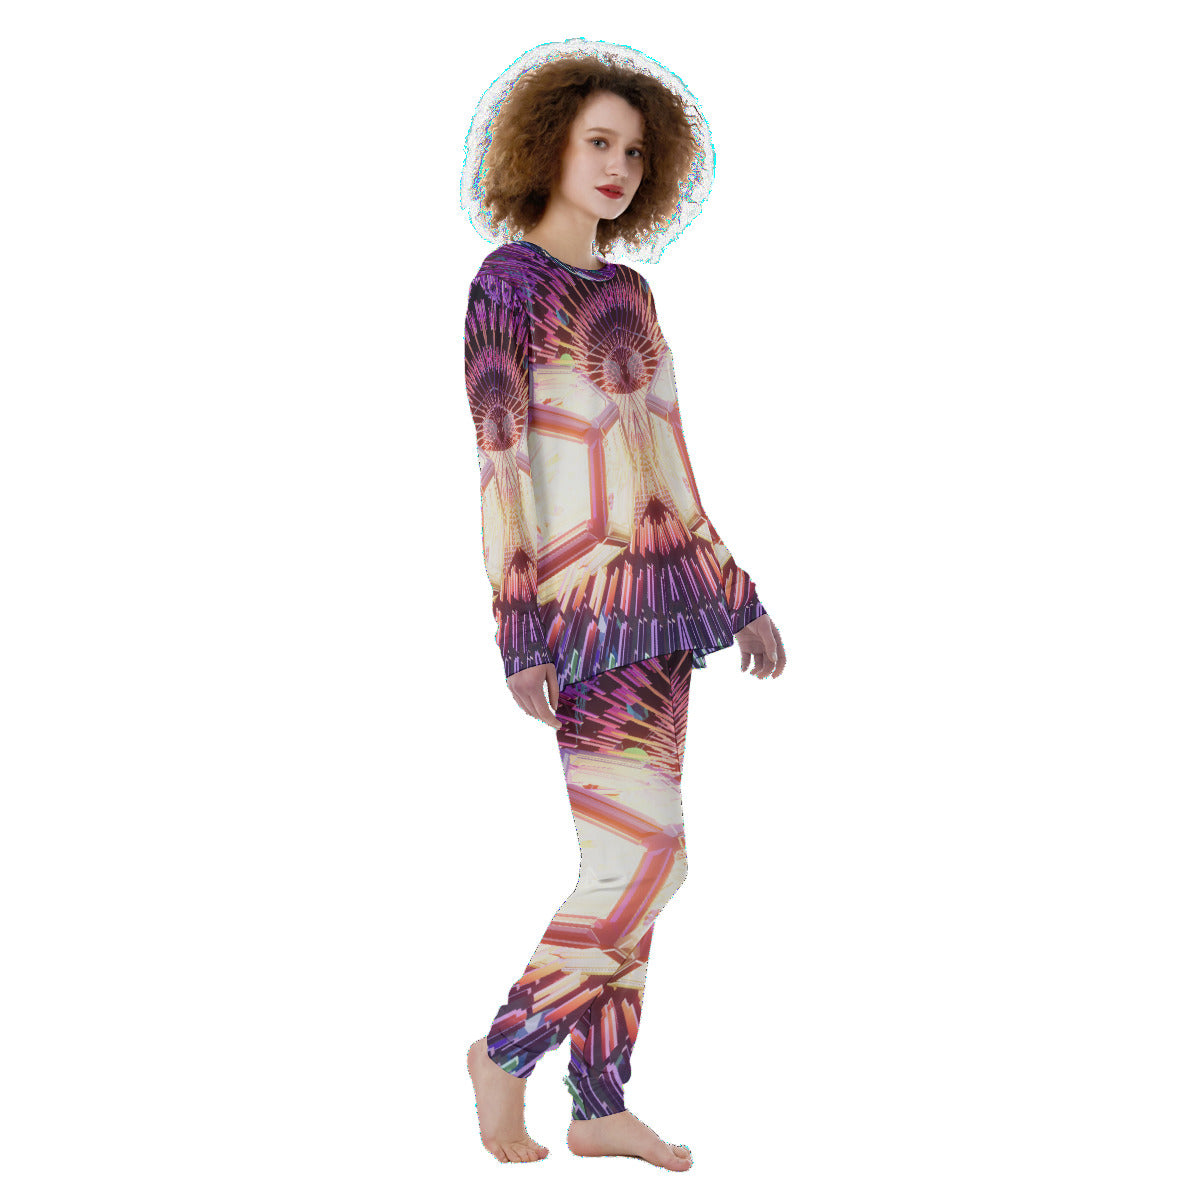 Psychedelic Dodecahedron 3D Digital Art Print Women's Pajamas